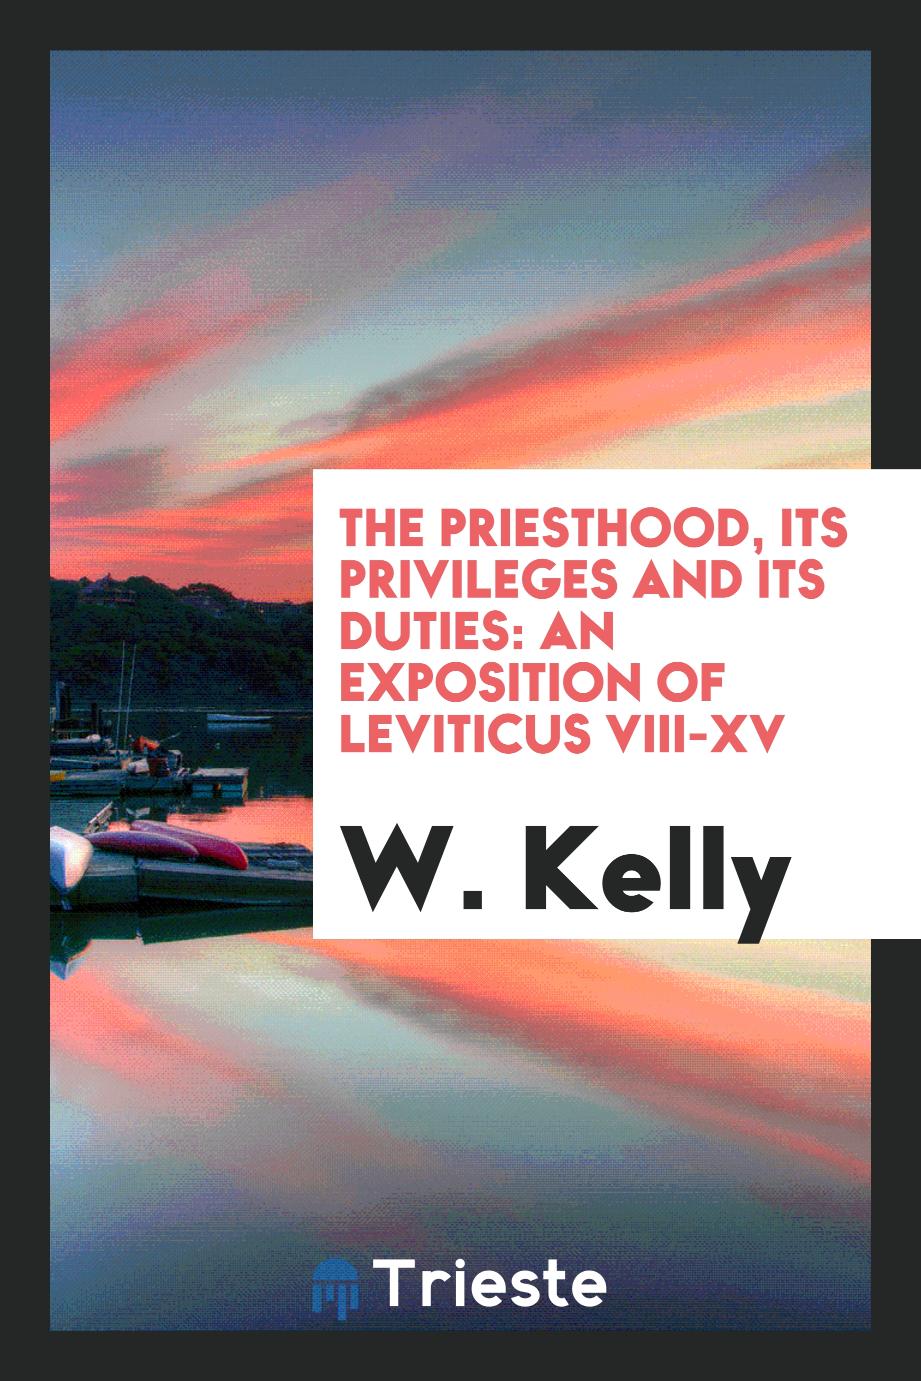 The Priesthood, Its Privileges and Its Duties: An Exposition of Leviticus VIII-XV